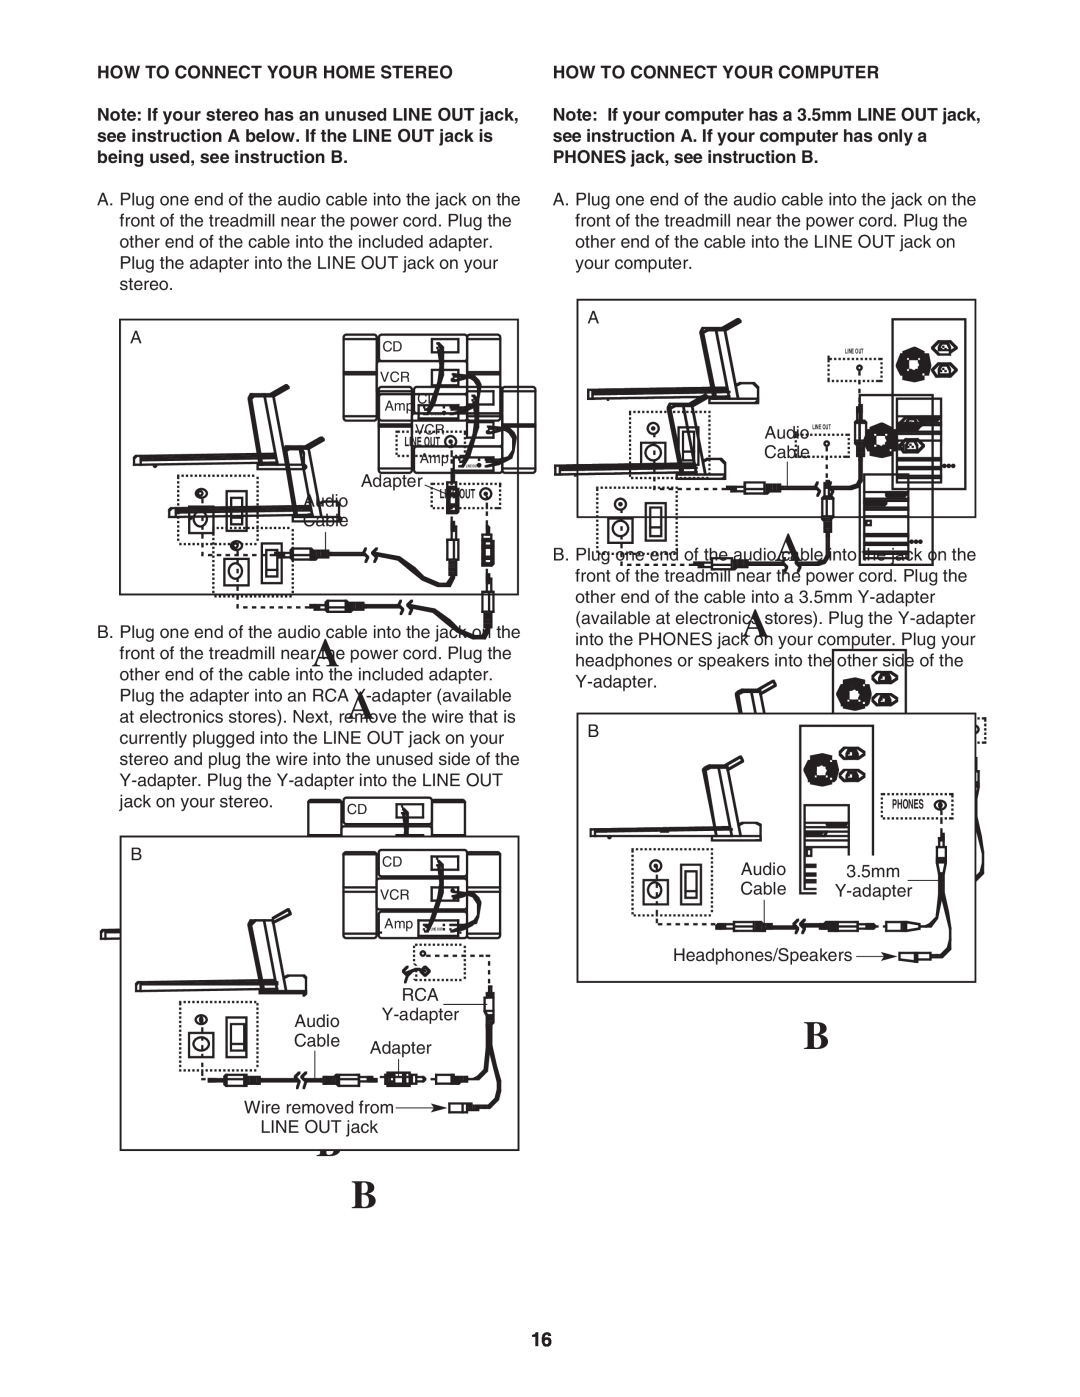 ProForm DTL4495C.0 user manual How To Connect Your Home Stereo, How To Connect Your Computer, Audio LINE OUT 